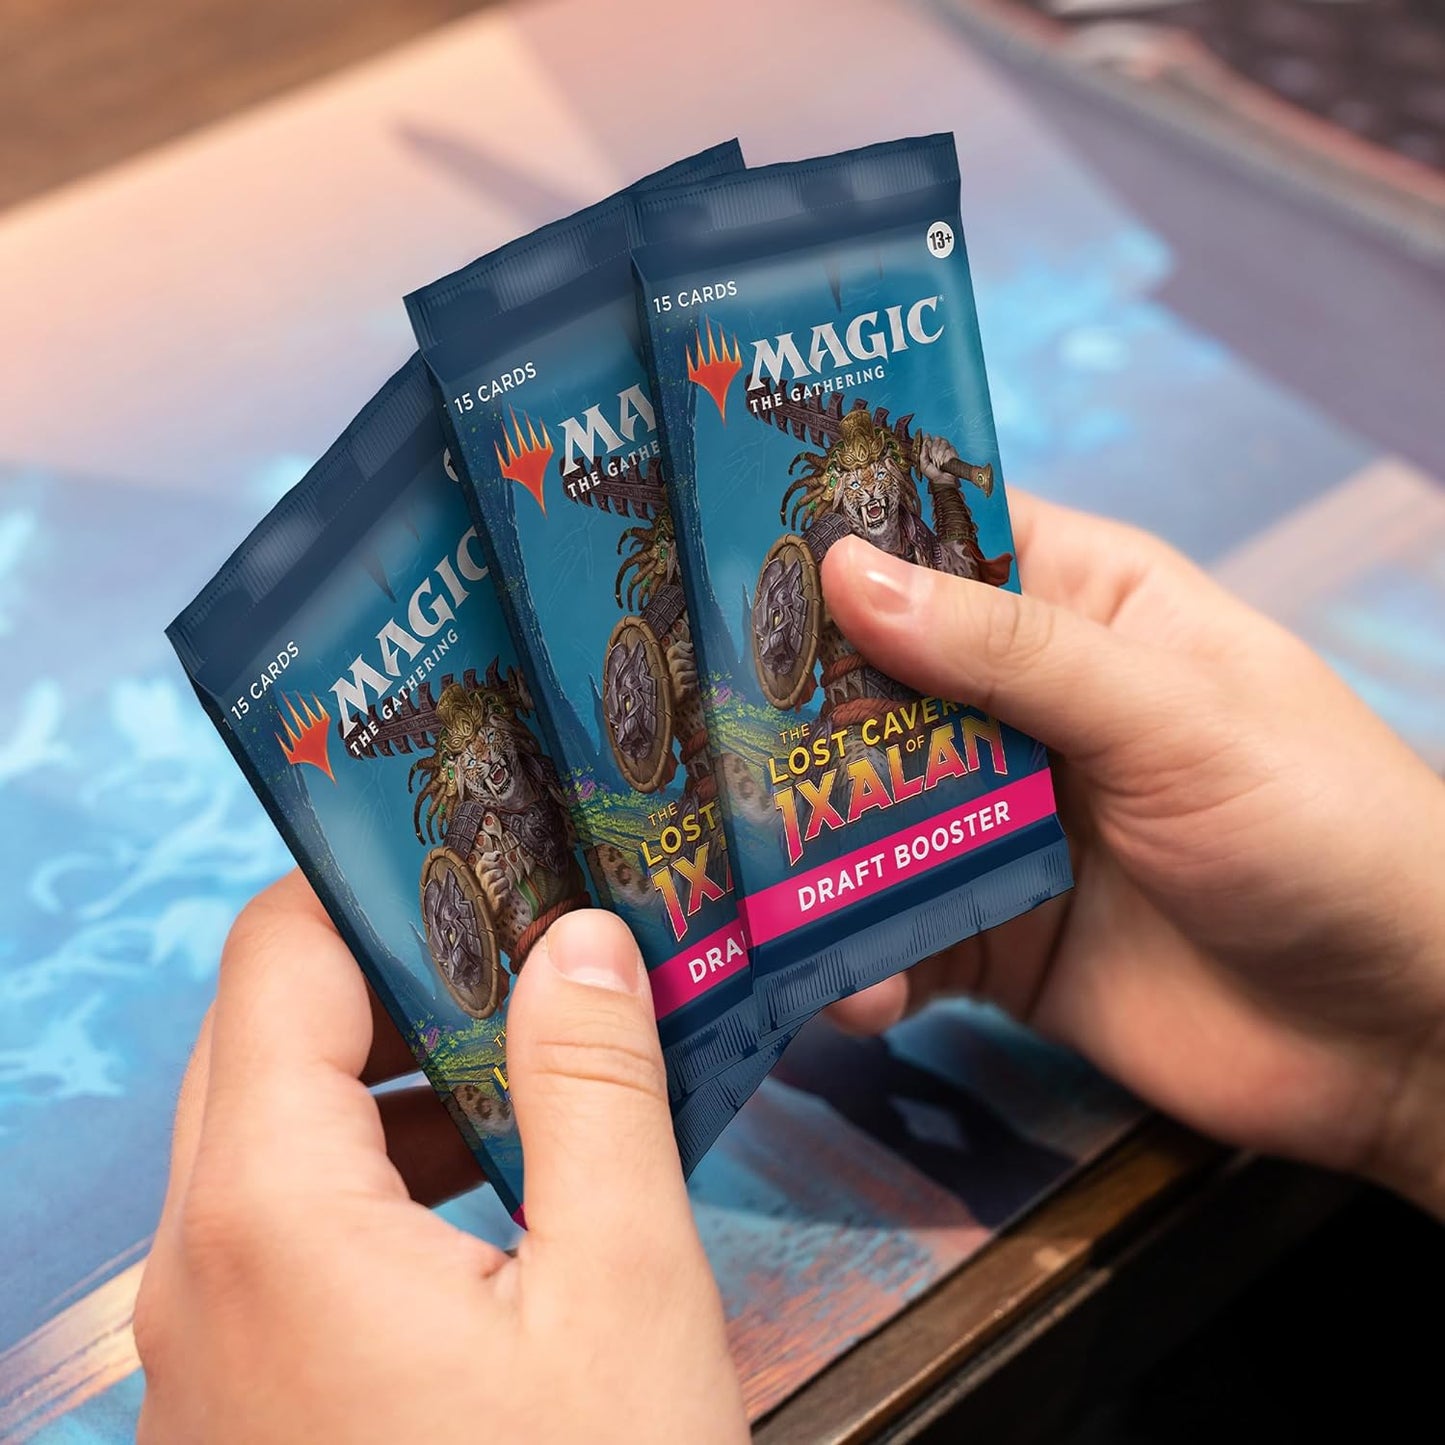 The Lost Caverns of Ixalan Draft Booster Box - Magic The Gathering